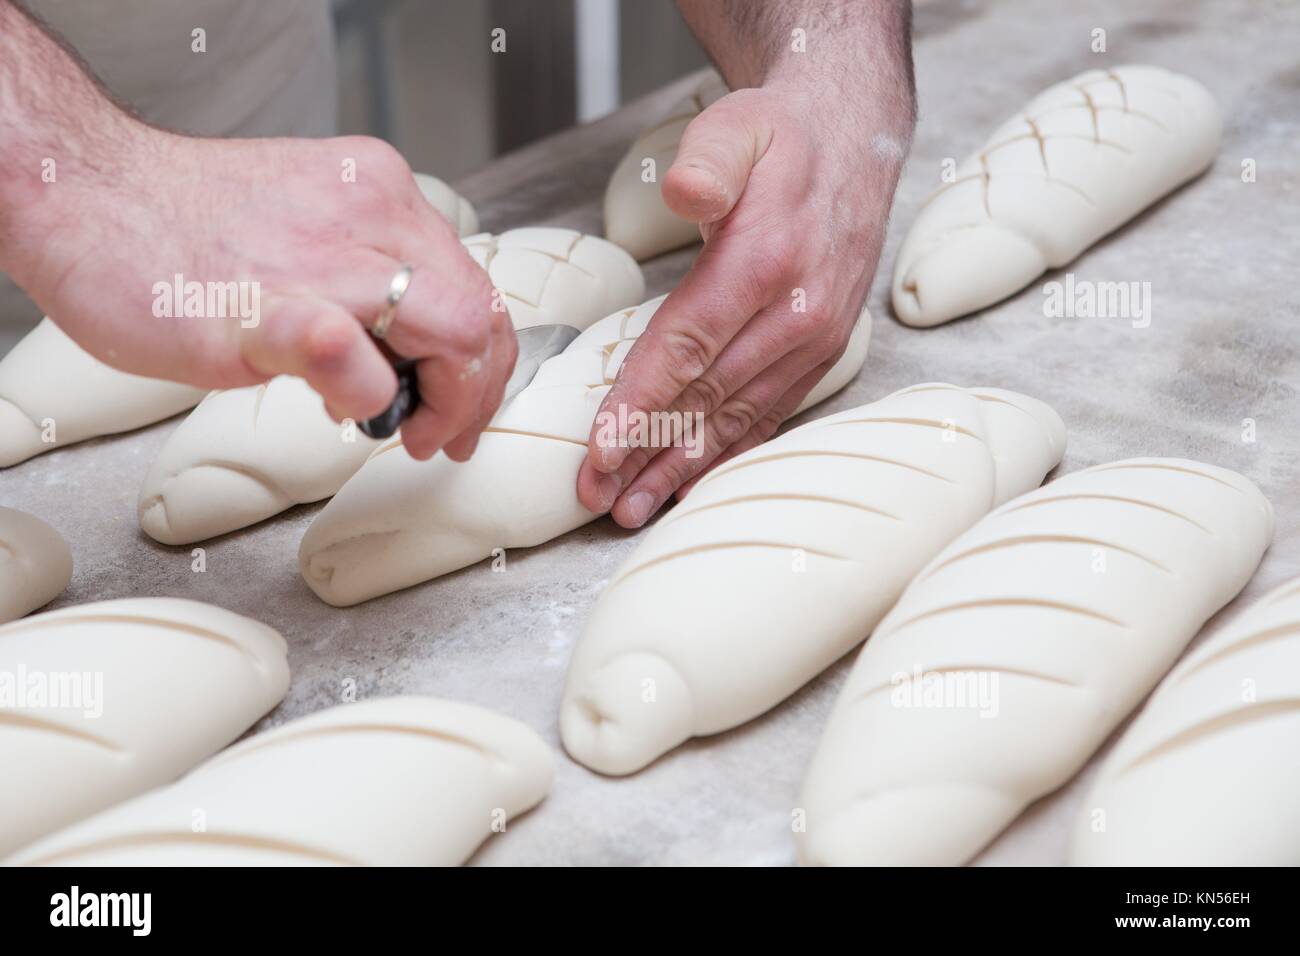 Baker making patterns on raw bread using a knife to shape the dough prior to baking. Manufacturing process of spanish bread. Stock Photo